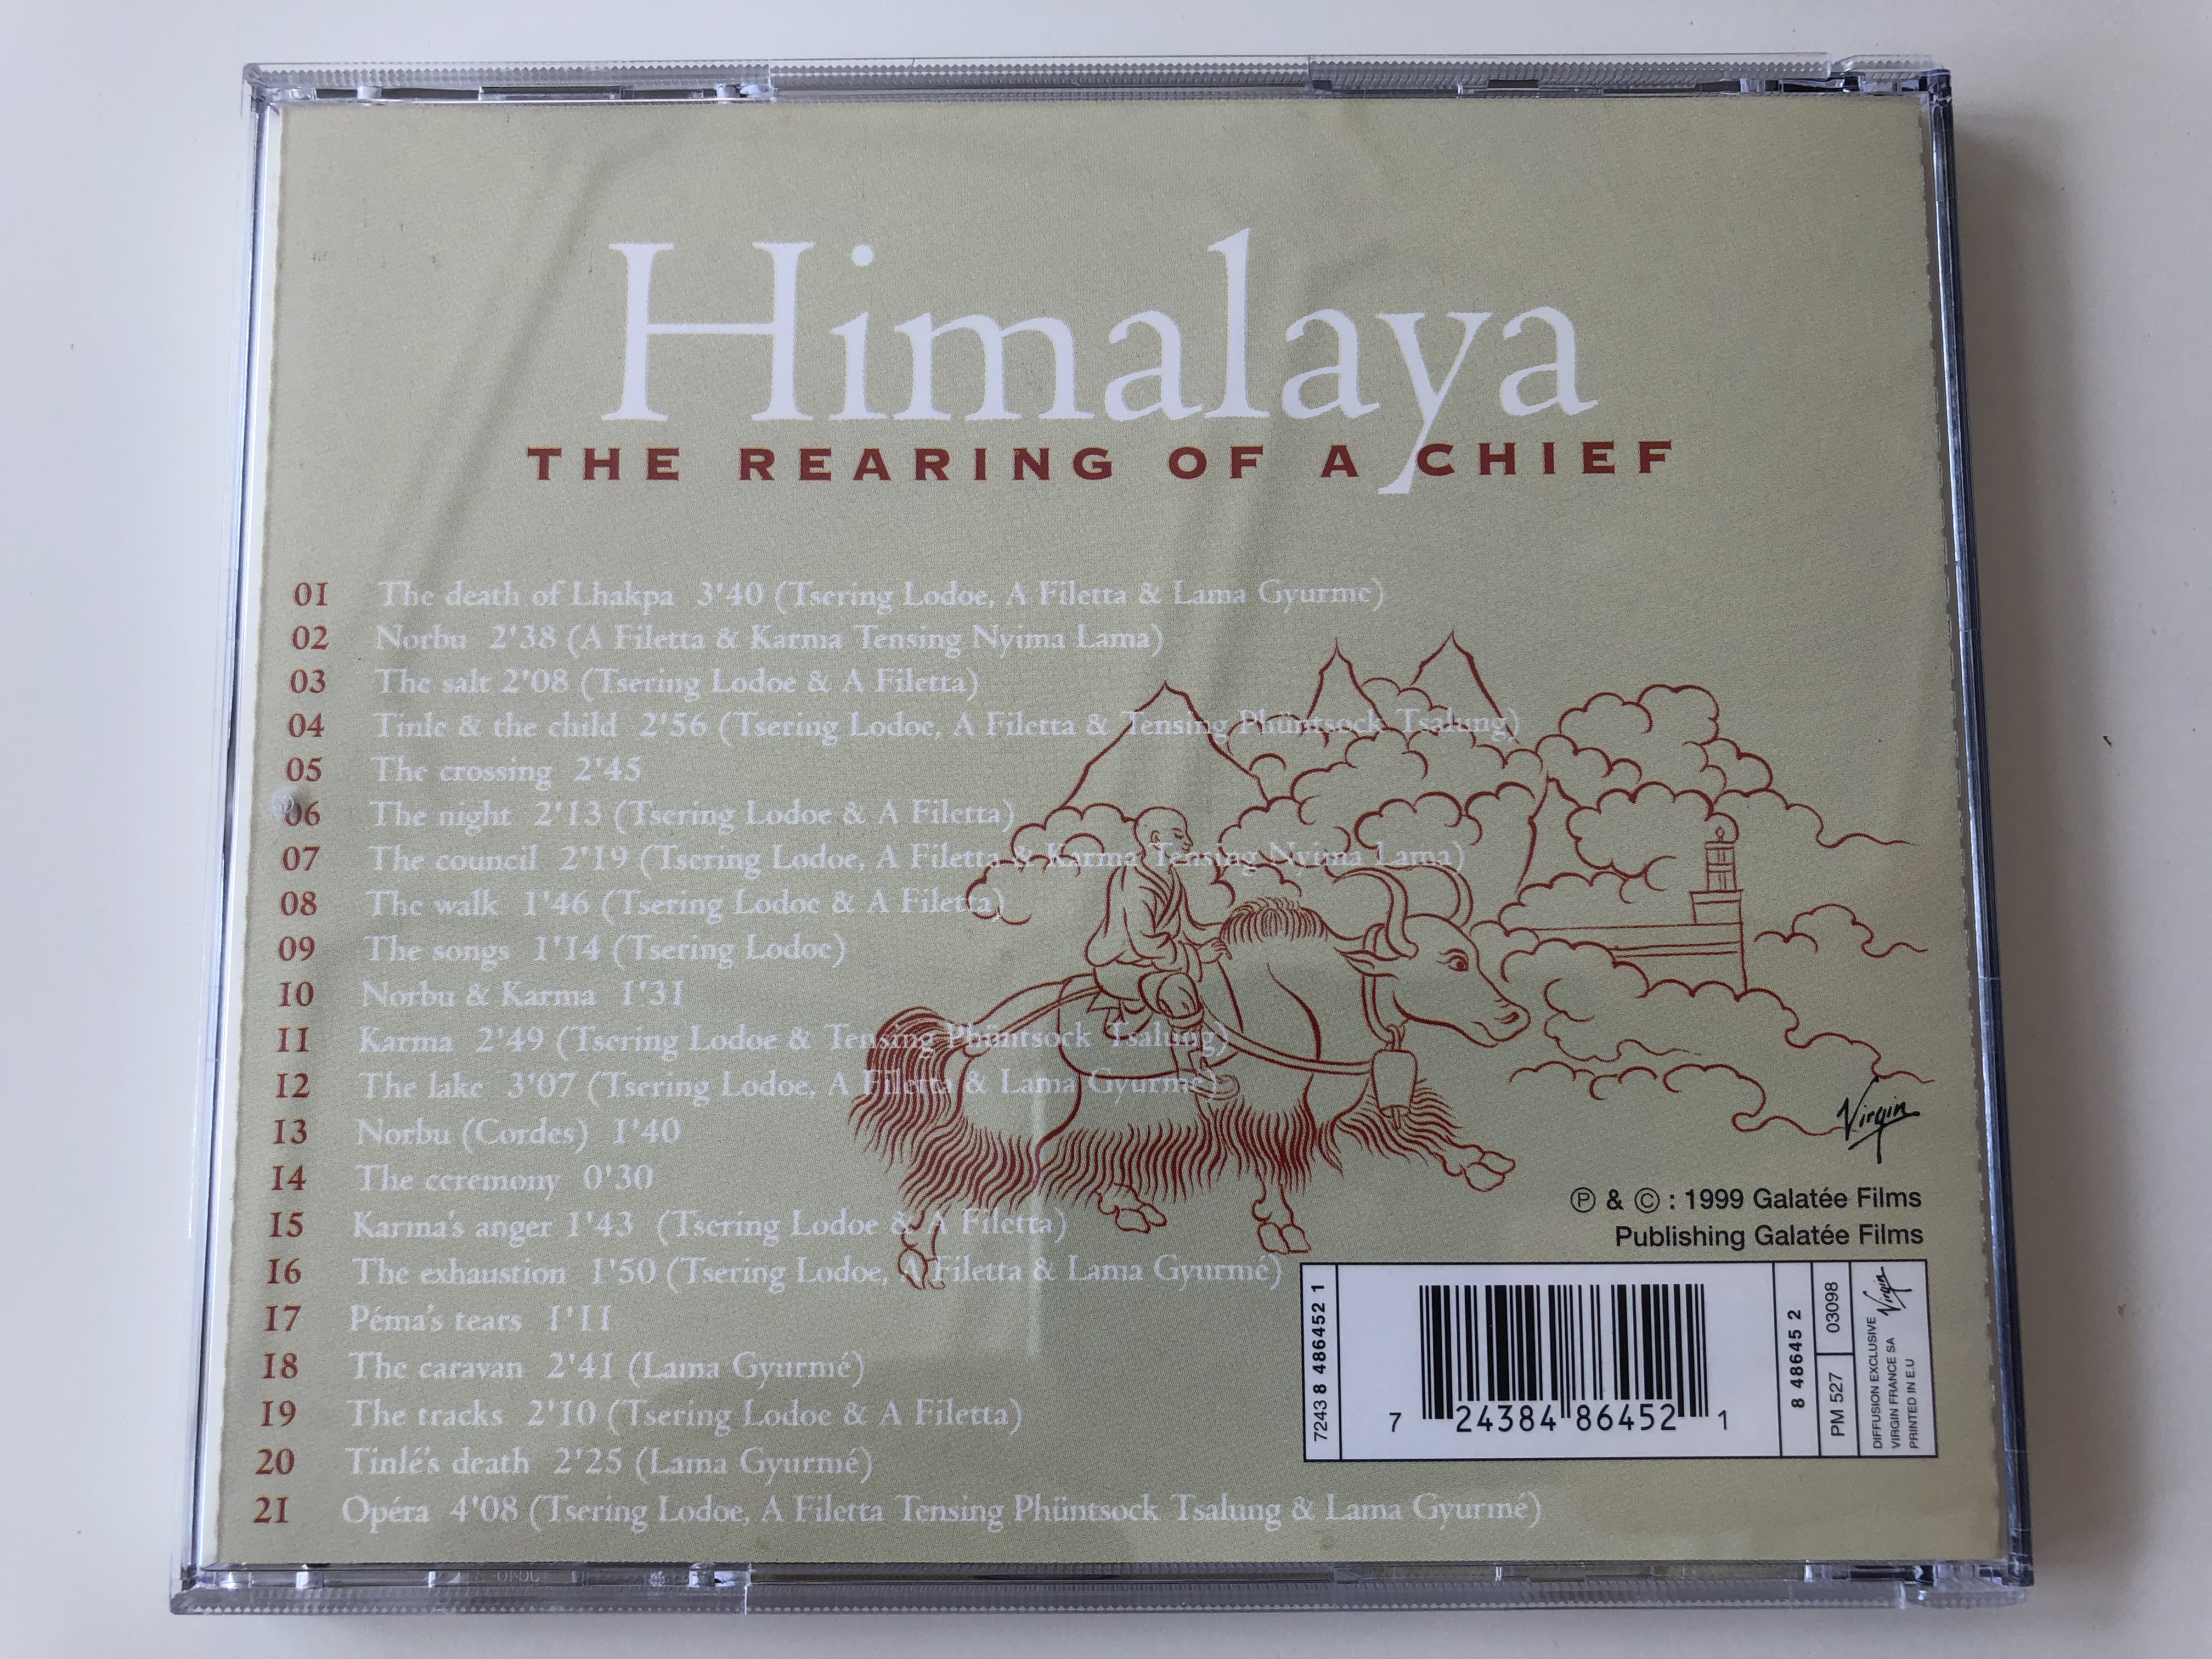 original-soundtrack-himalaya-the-rearing-of-a-chief-music-conducted-by-bruno-coulais-directed-by-eric-valli-galatee-films-audio-cd-1999-8-48645-2-7-.jpg